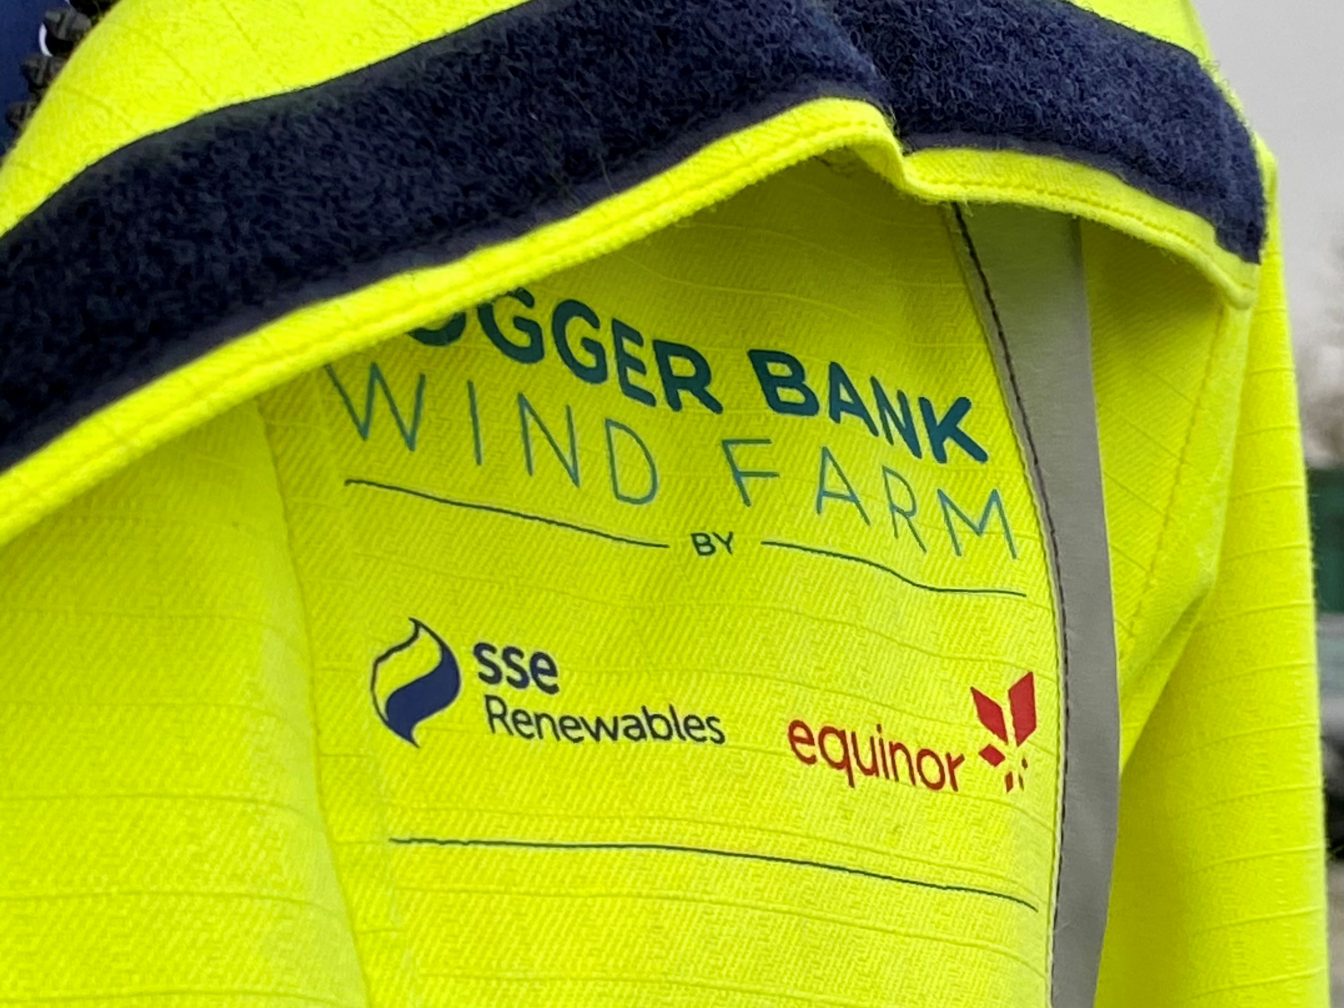 A close-up of a Dogger Bank Wind Farm jacket with project and developers' logos